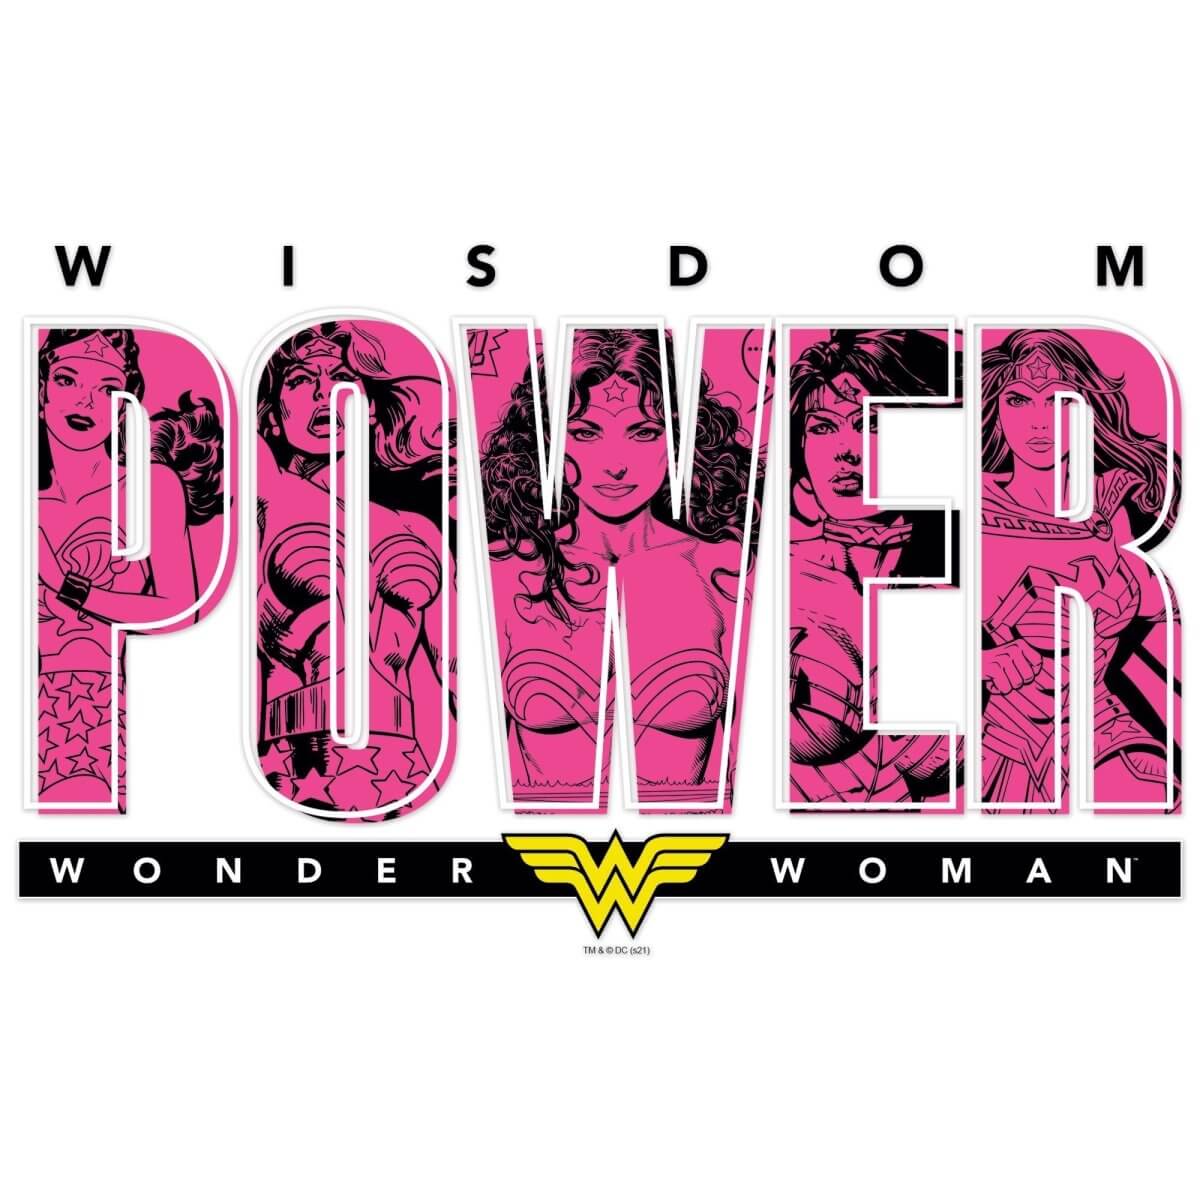 Kismet Decals Wonder Woman Wisdom Power Officially Licensed Wall Sticker - Easy DIY DC Comics Home, Kids or Adult Bedroom, Office, Living Room Decor Wall Art - Kismet Decals